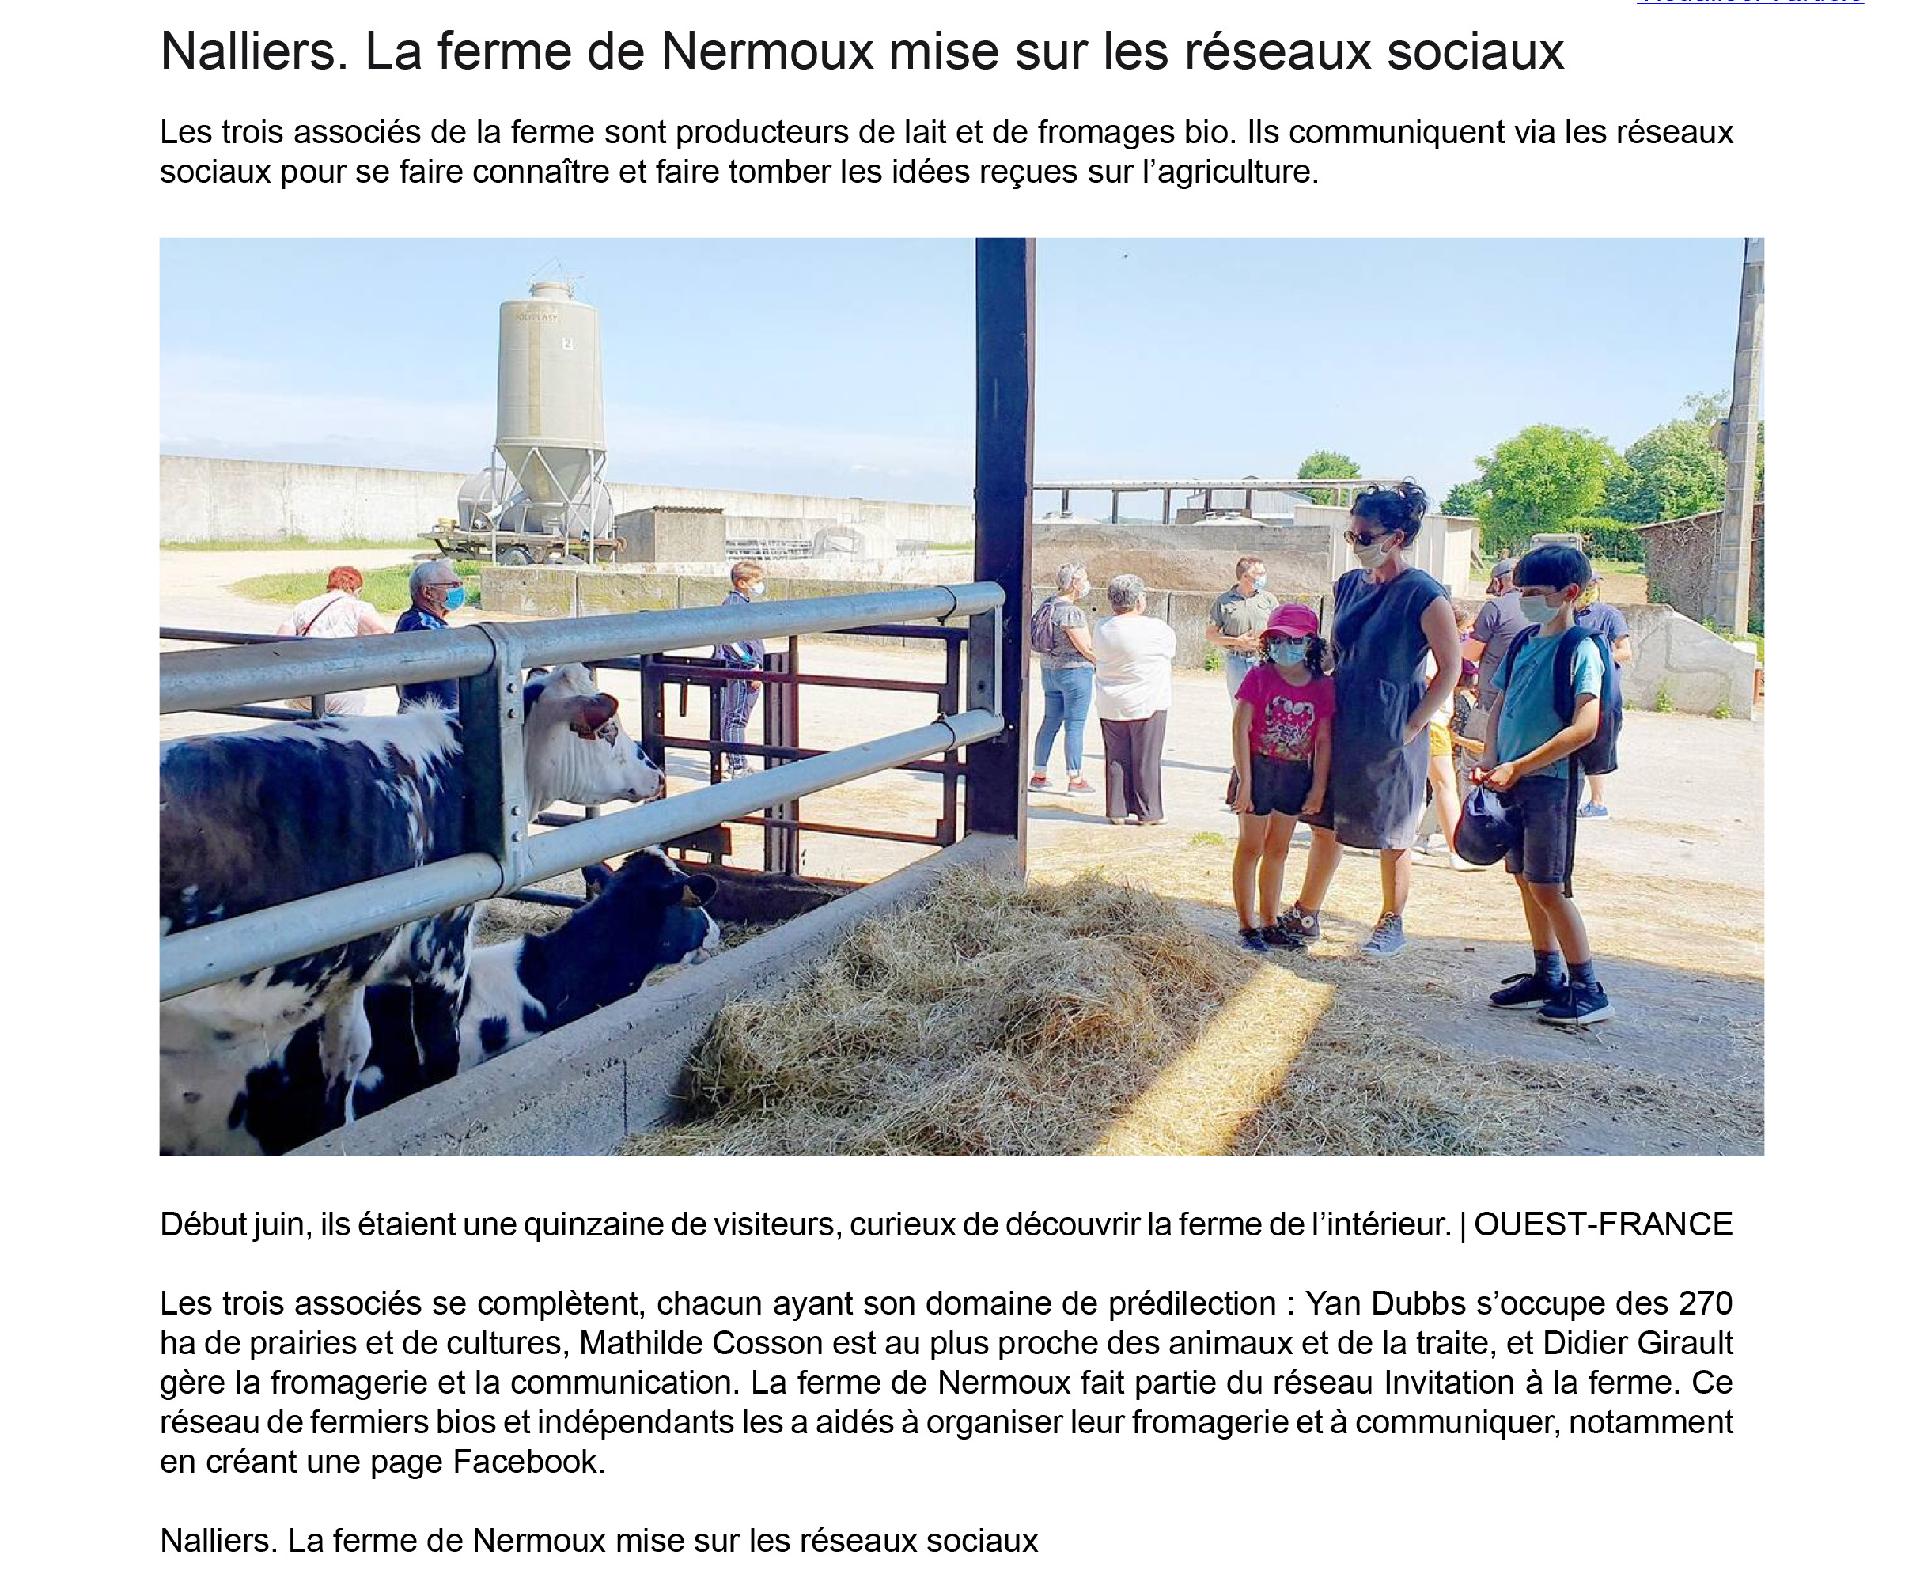 Article - Ouest France